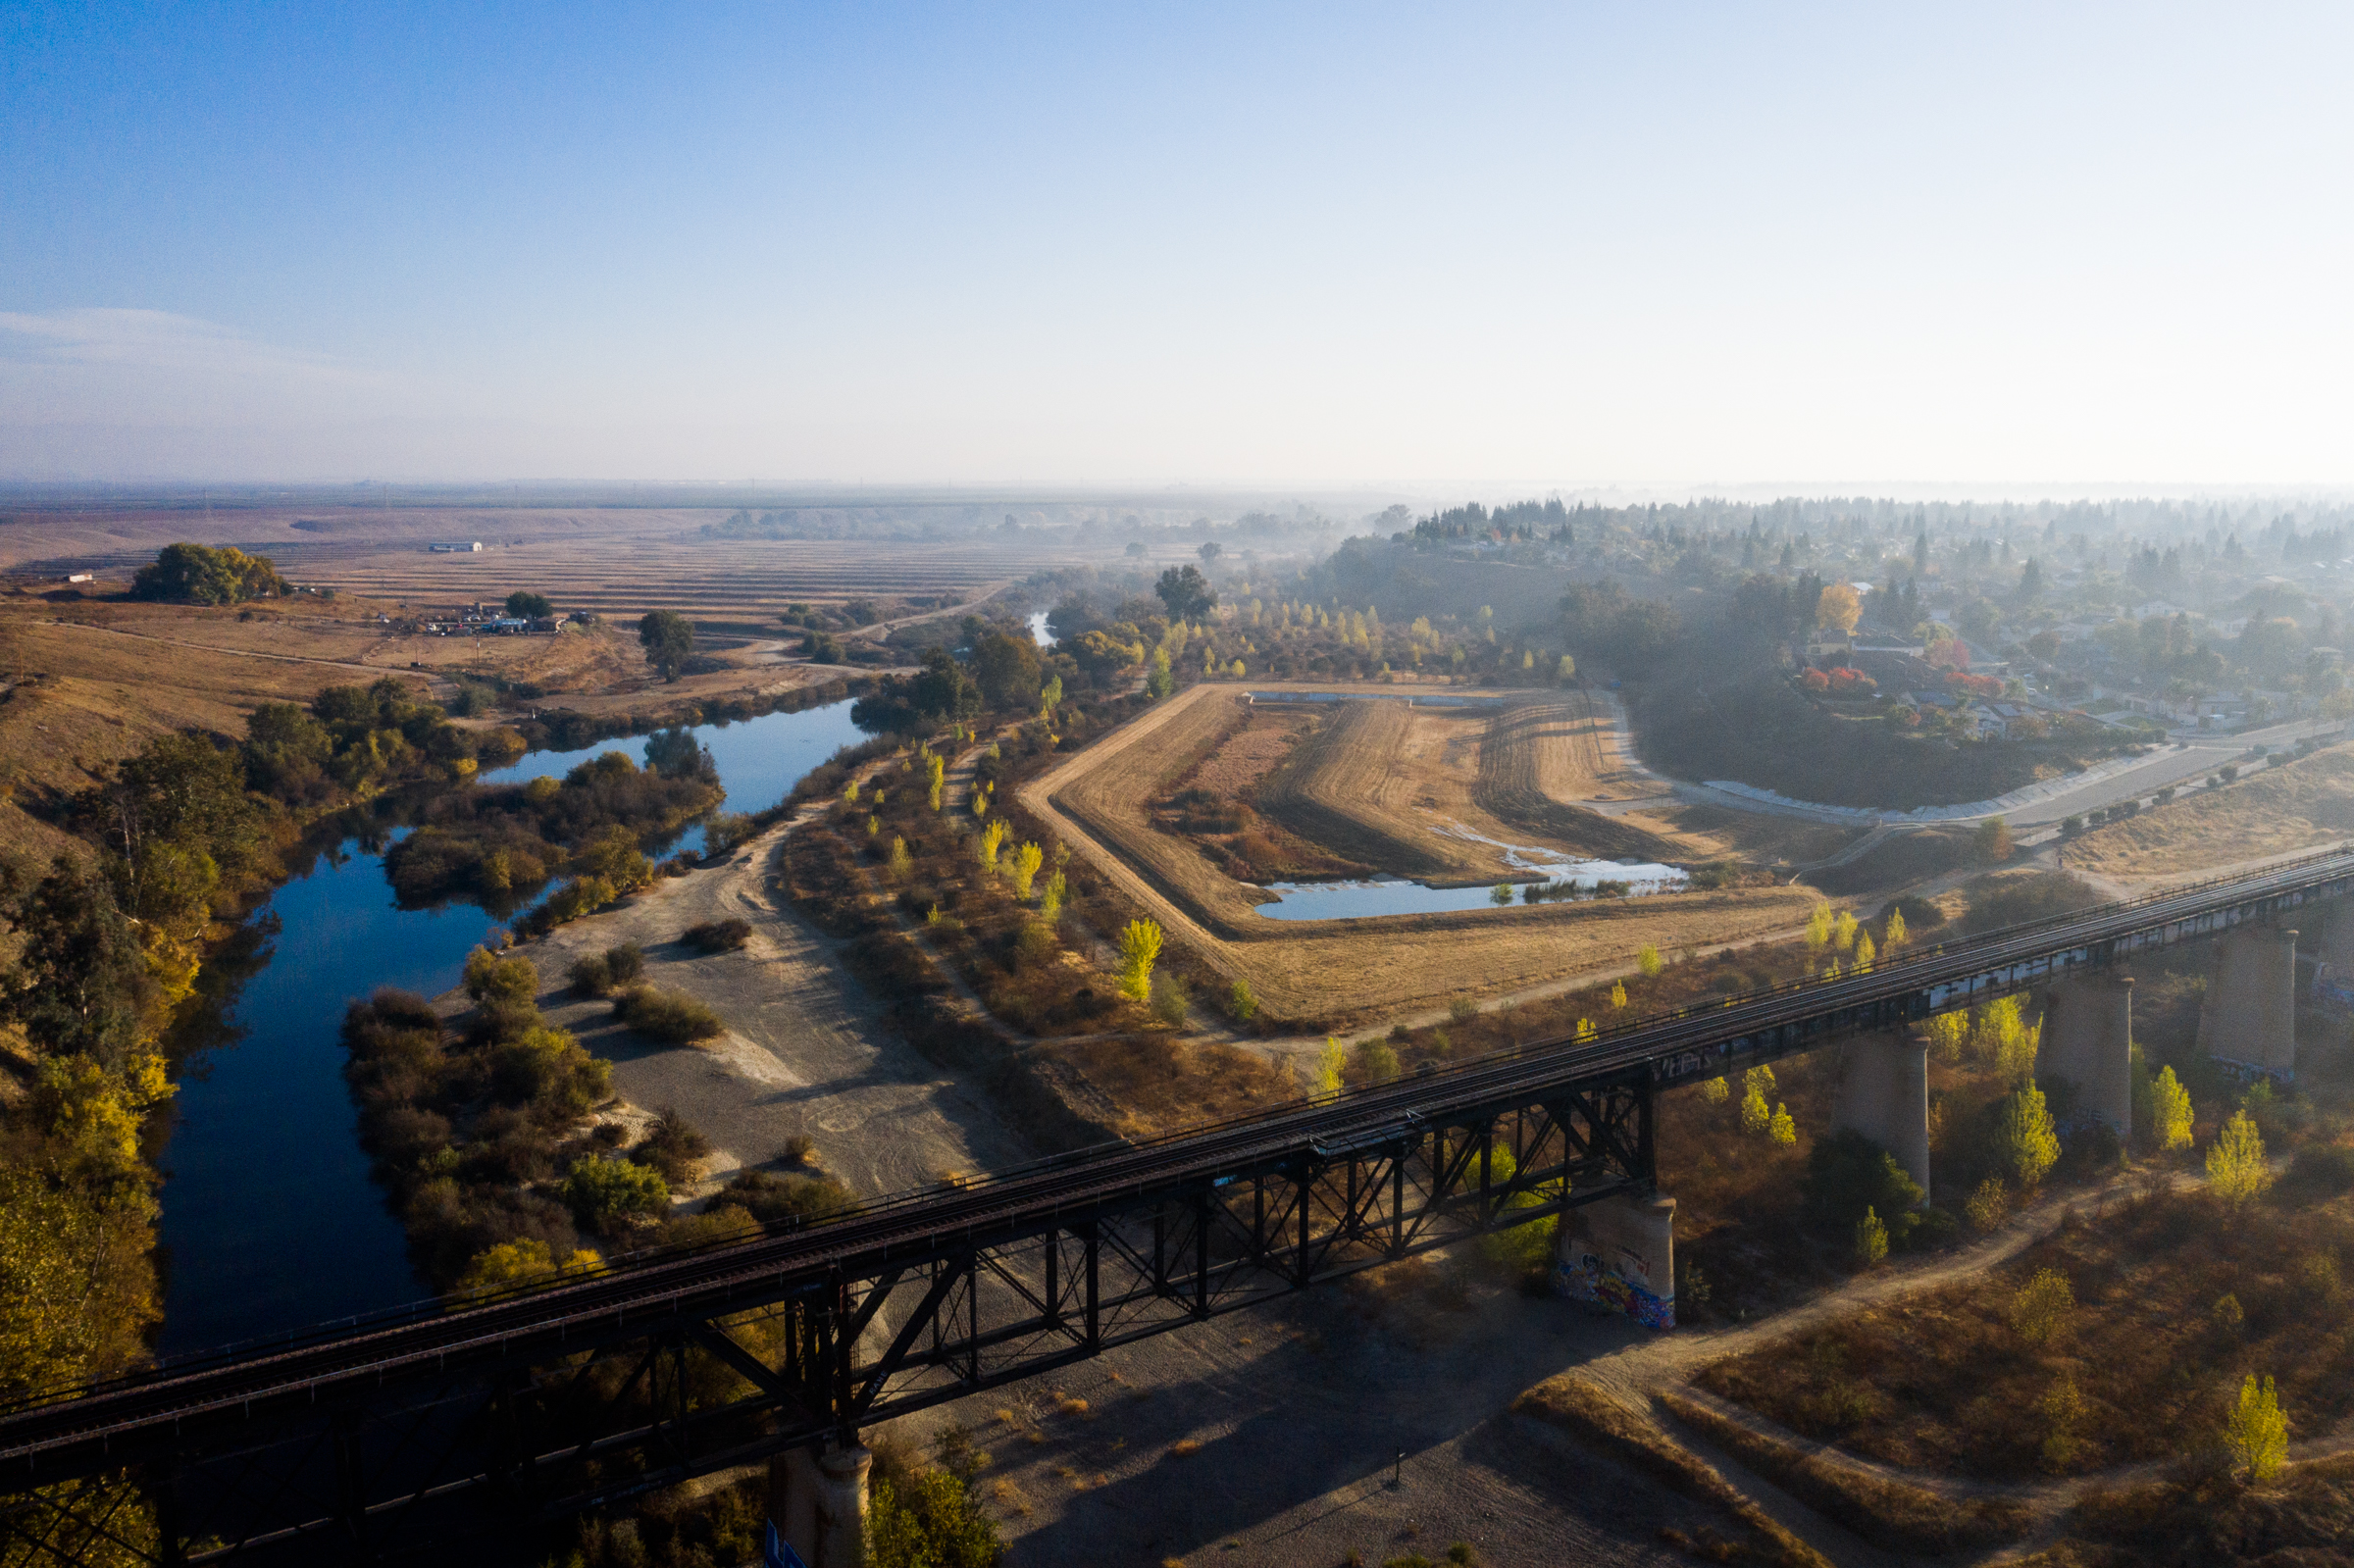 A view looking east along the river the divides Fresno and Madera, California